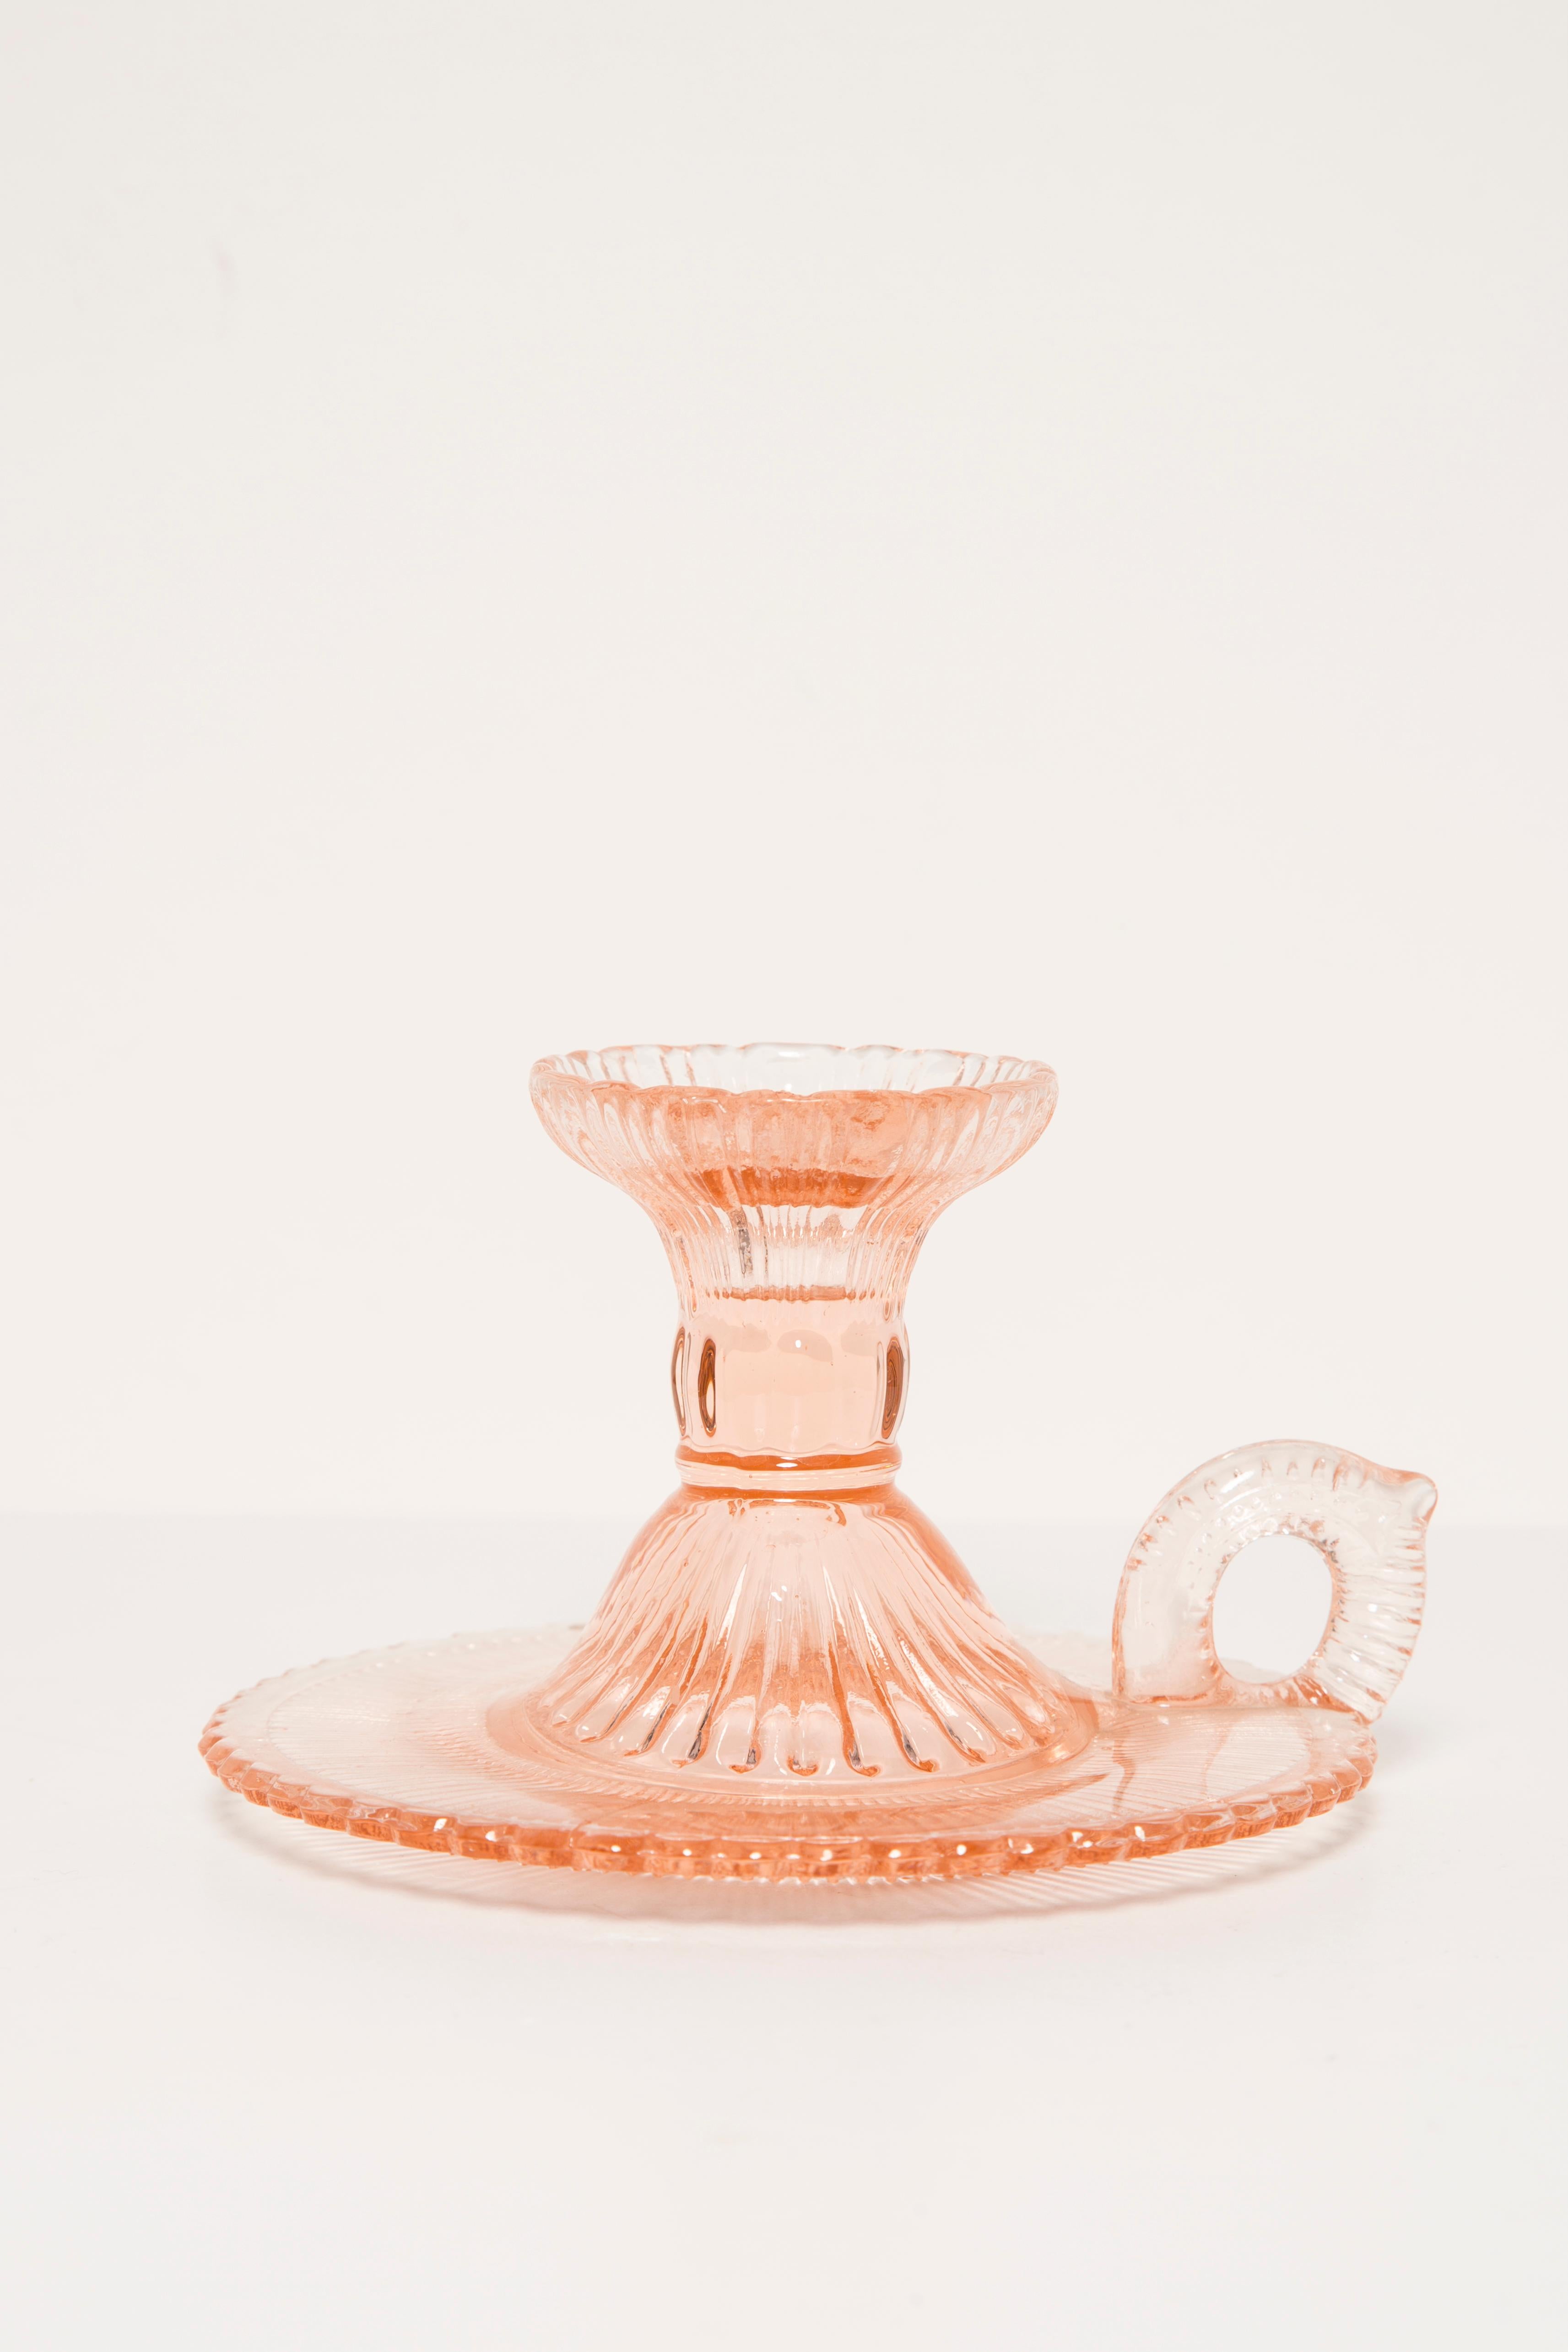 Mid-Century Light Rose Glass Candlestick, Europe, 1960s In Good Condition For Sale In 05-080 Hornowek, PL